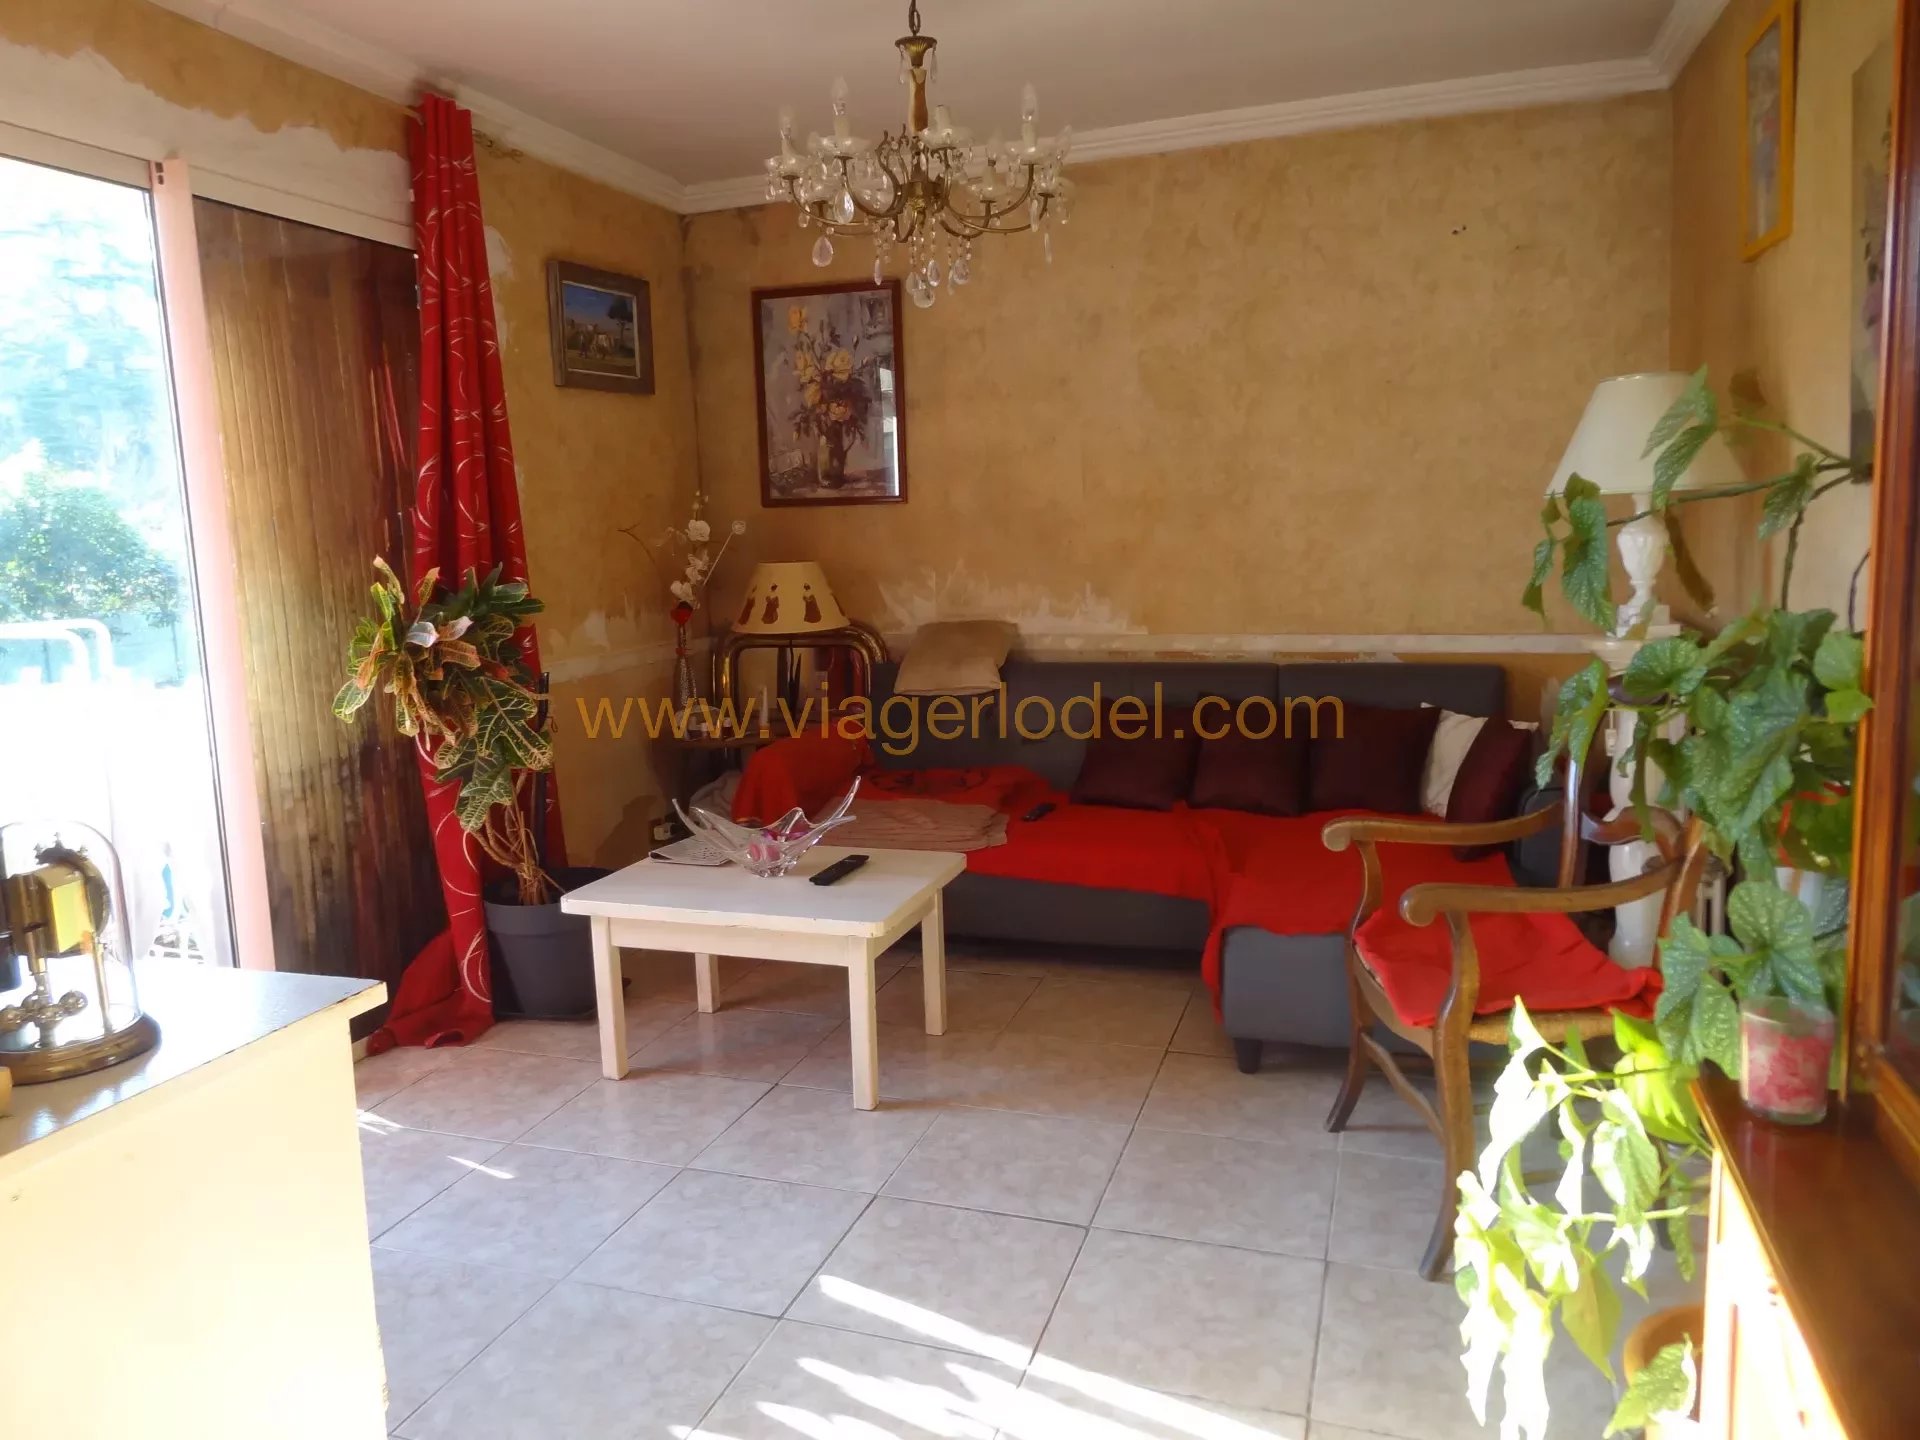 Ref.: 9409 - BARE OWNERSHIP SALES - NIMES (30) - Occupied house